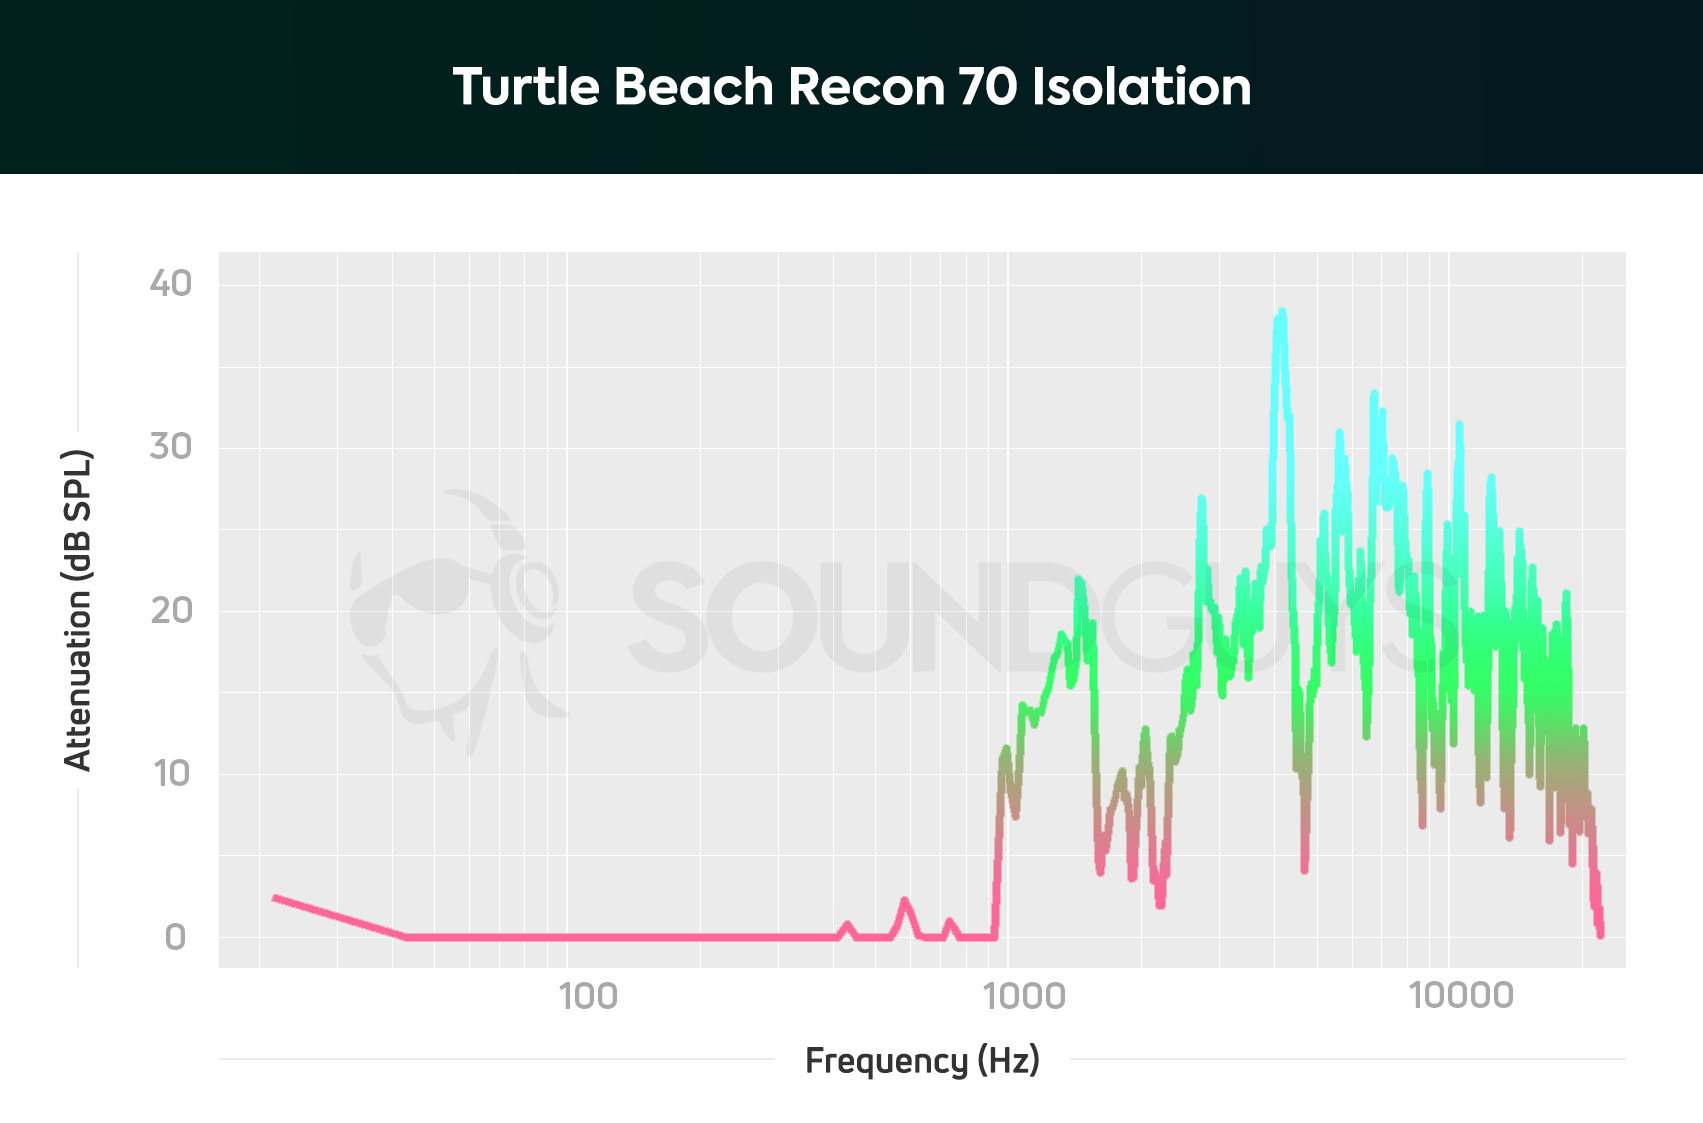 An isolation chart for The Turtle Beach Recon 70 gaming headset, which shows pretty average attenuation for a gaming headset.